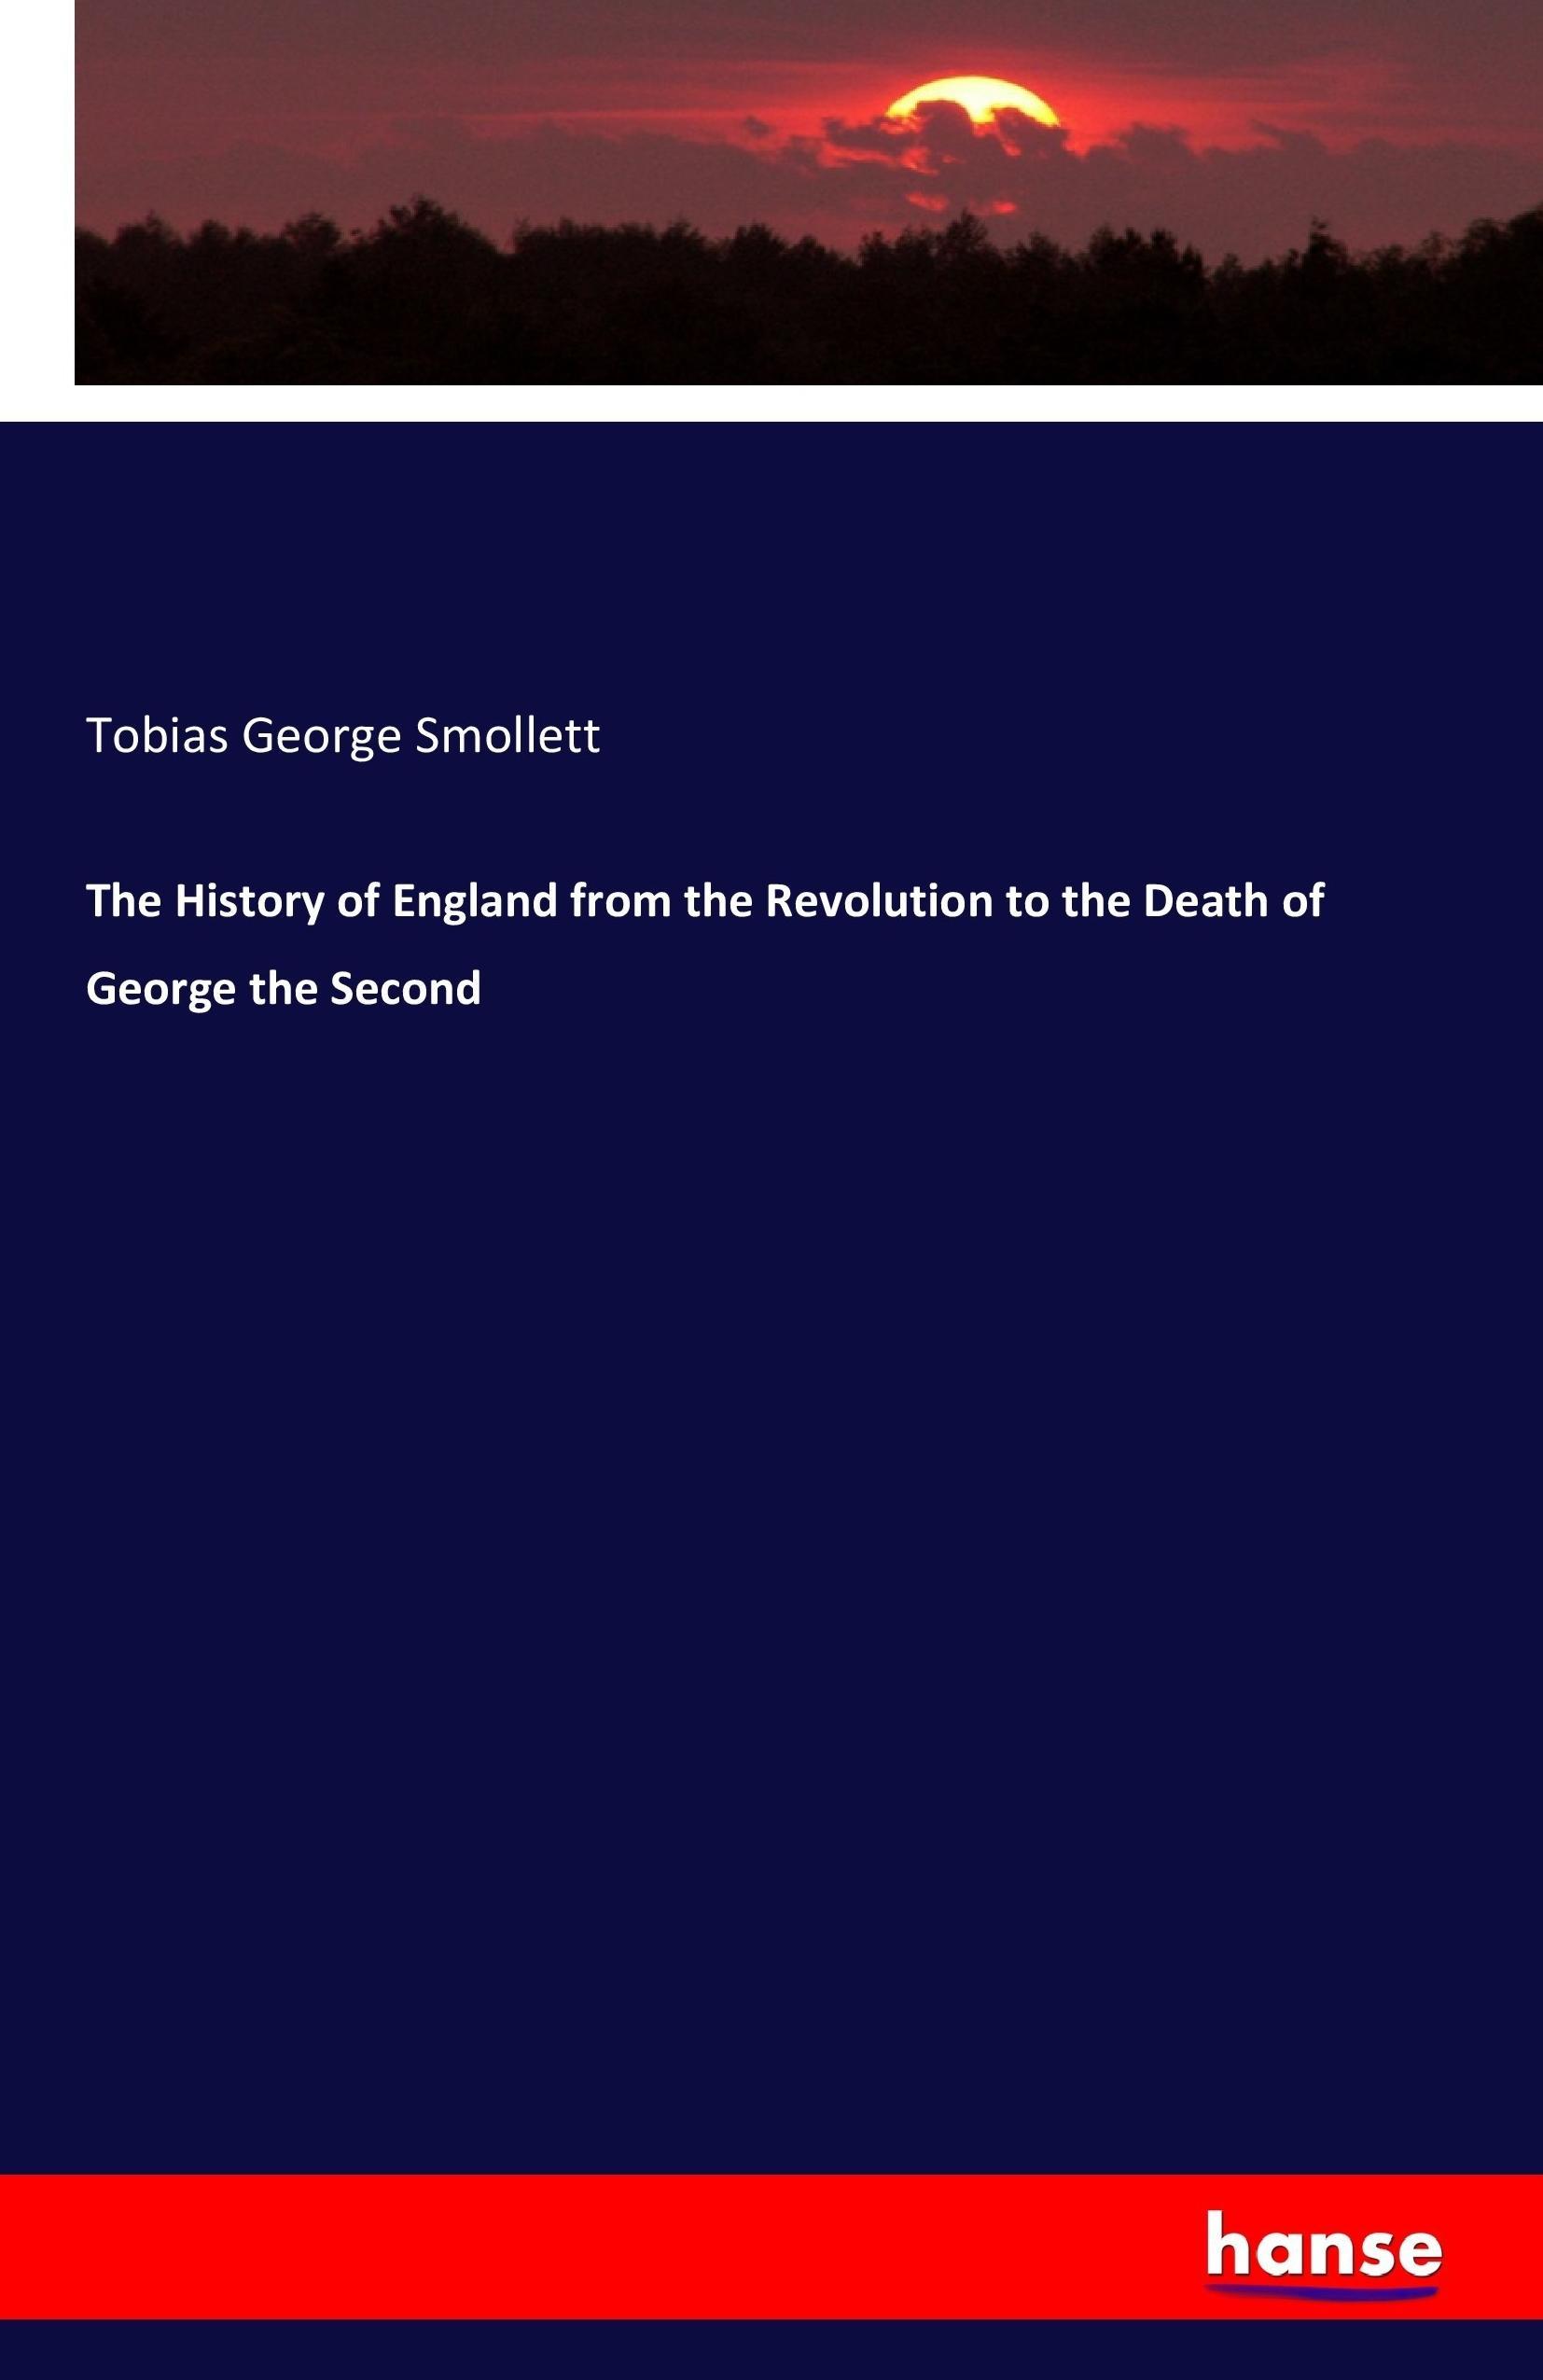 The History of England from the Revolution to the Death of George the Second / Tobias George Smollett / Taschenbuch / Paperback / 700 S. / Englisch / 2017 / hansebooks / EAN 9783742816740 - Smollett, Tobias George